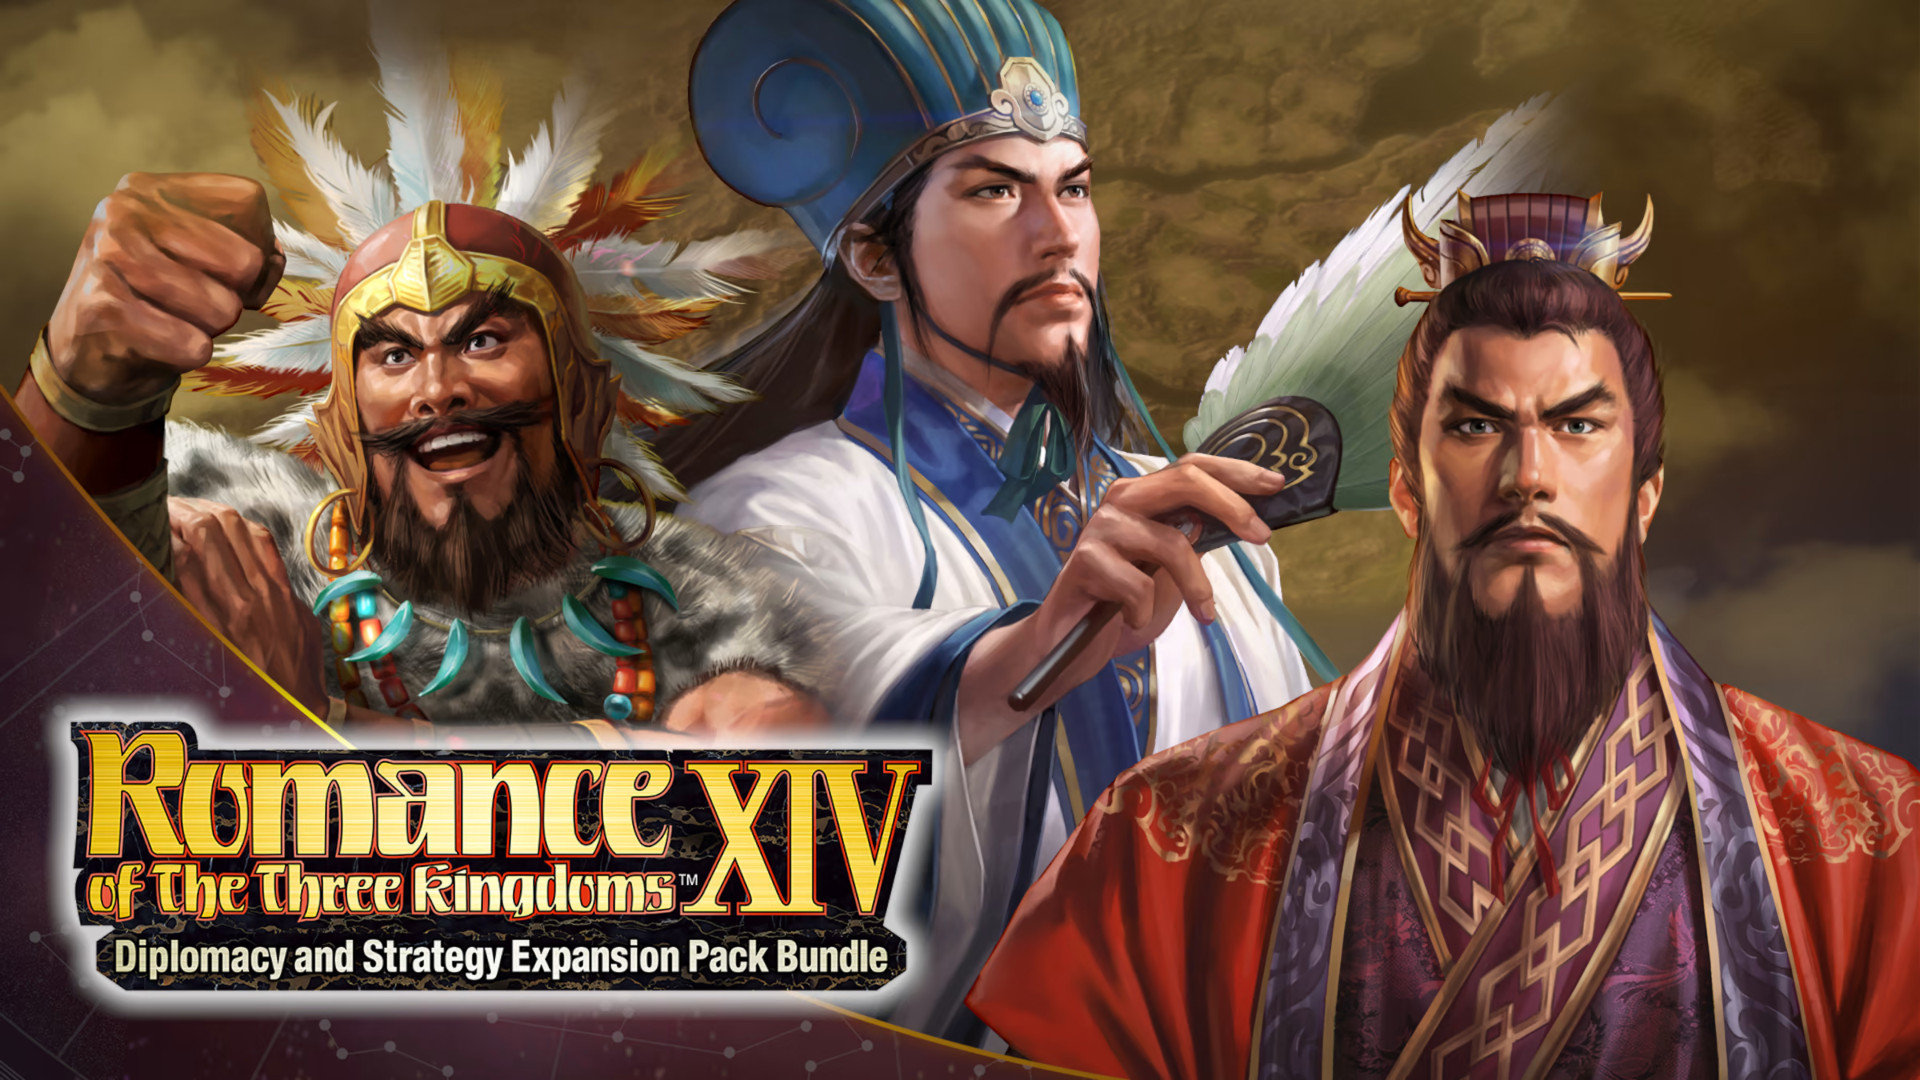 Romance of the Three Kingdoms XIV - Diplomacy and Strategy Expansion Pack DLC Steam CD key [USD 39.55]